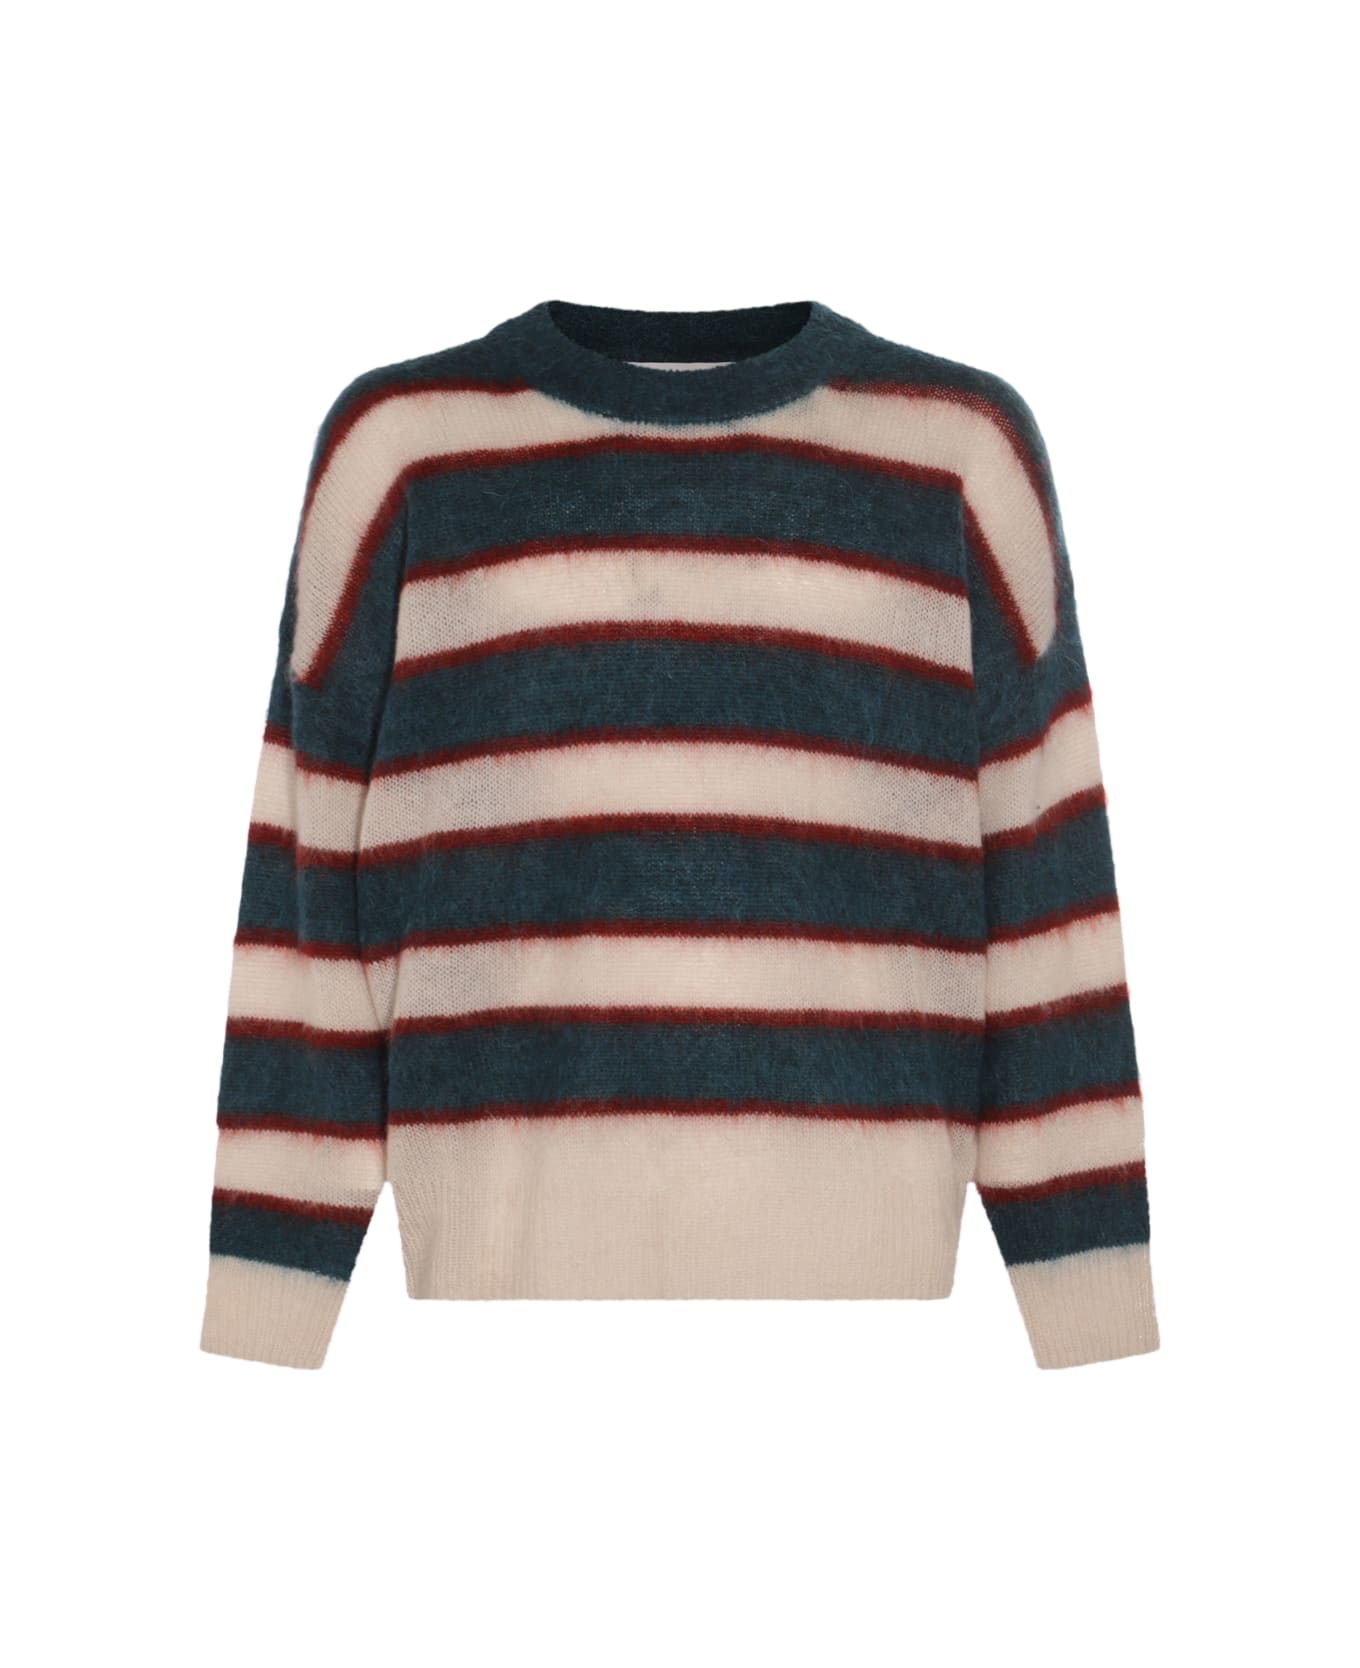 Isabel Marant Green And White Knitwear - Red ニットウェア